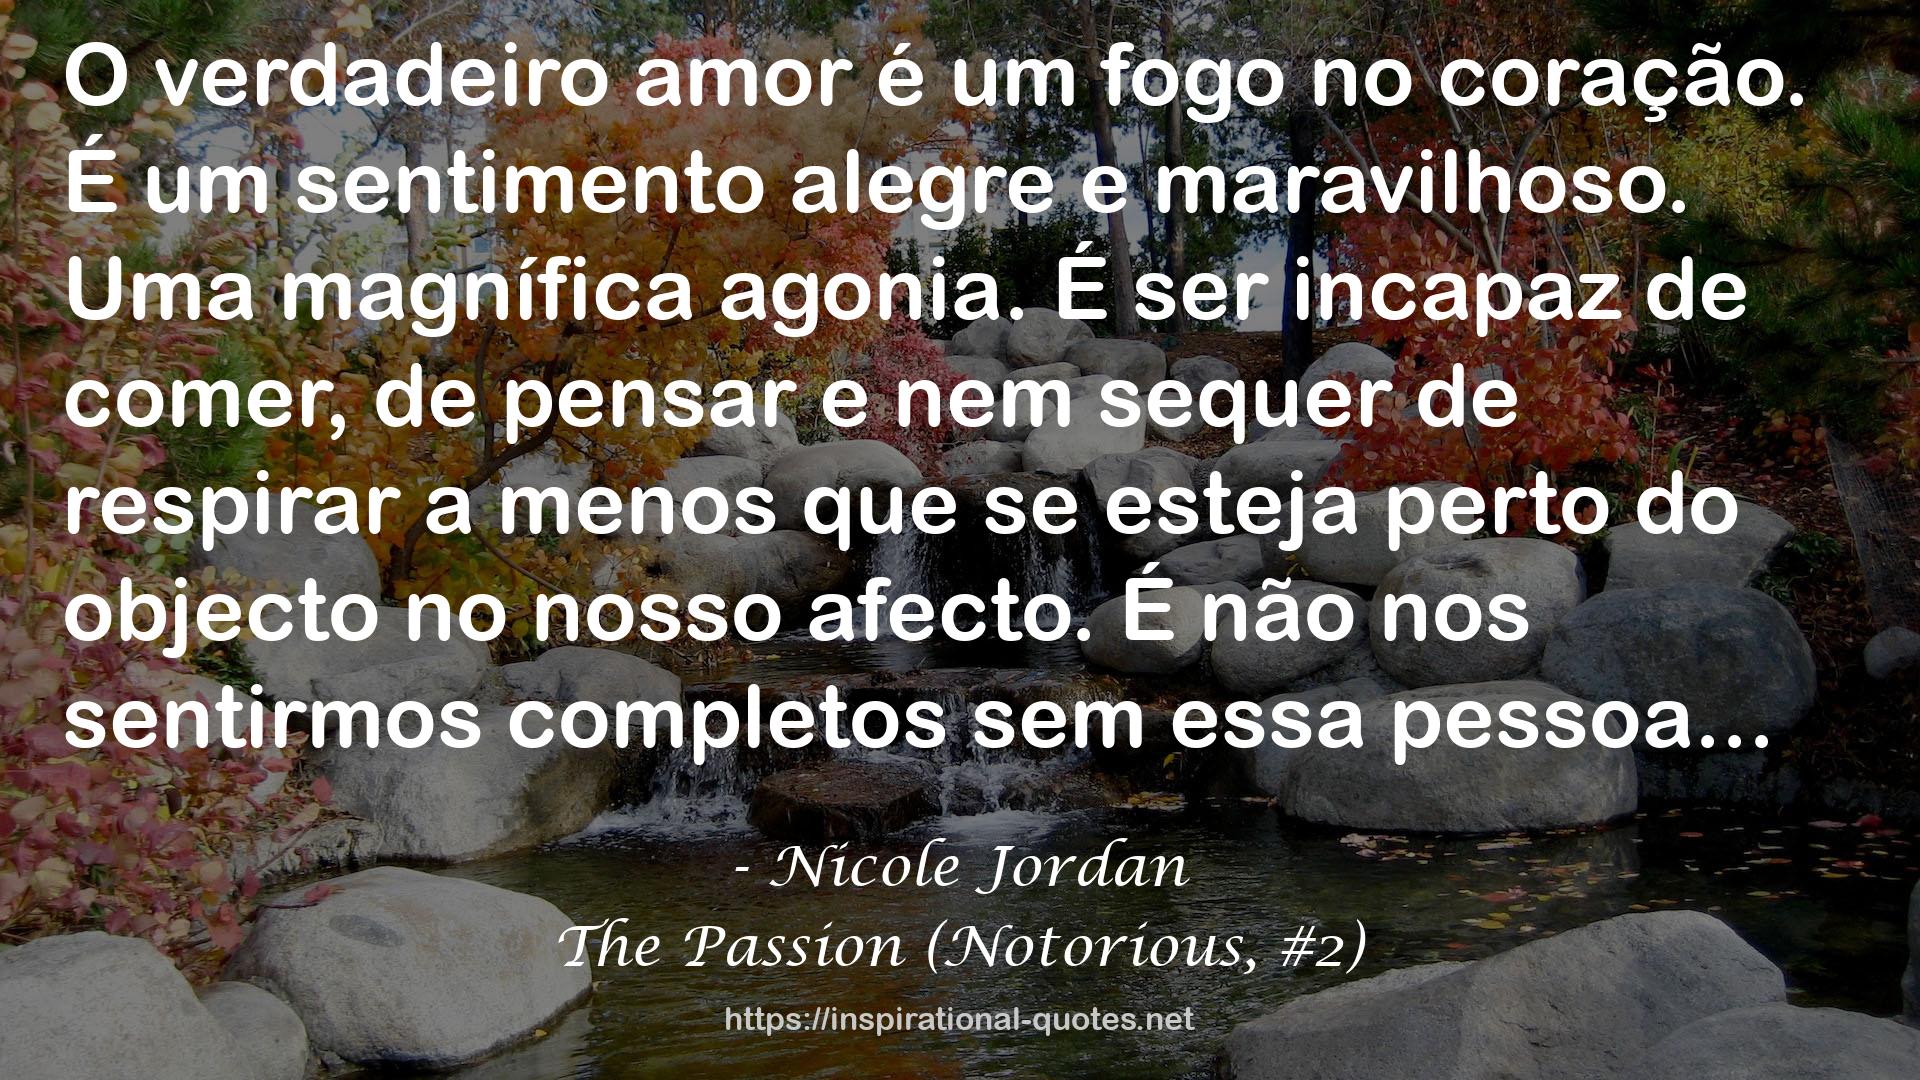 The Passion (Notorious, #2) QUOTES